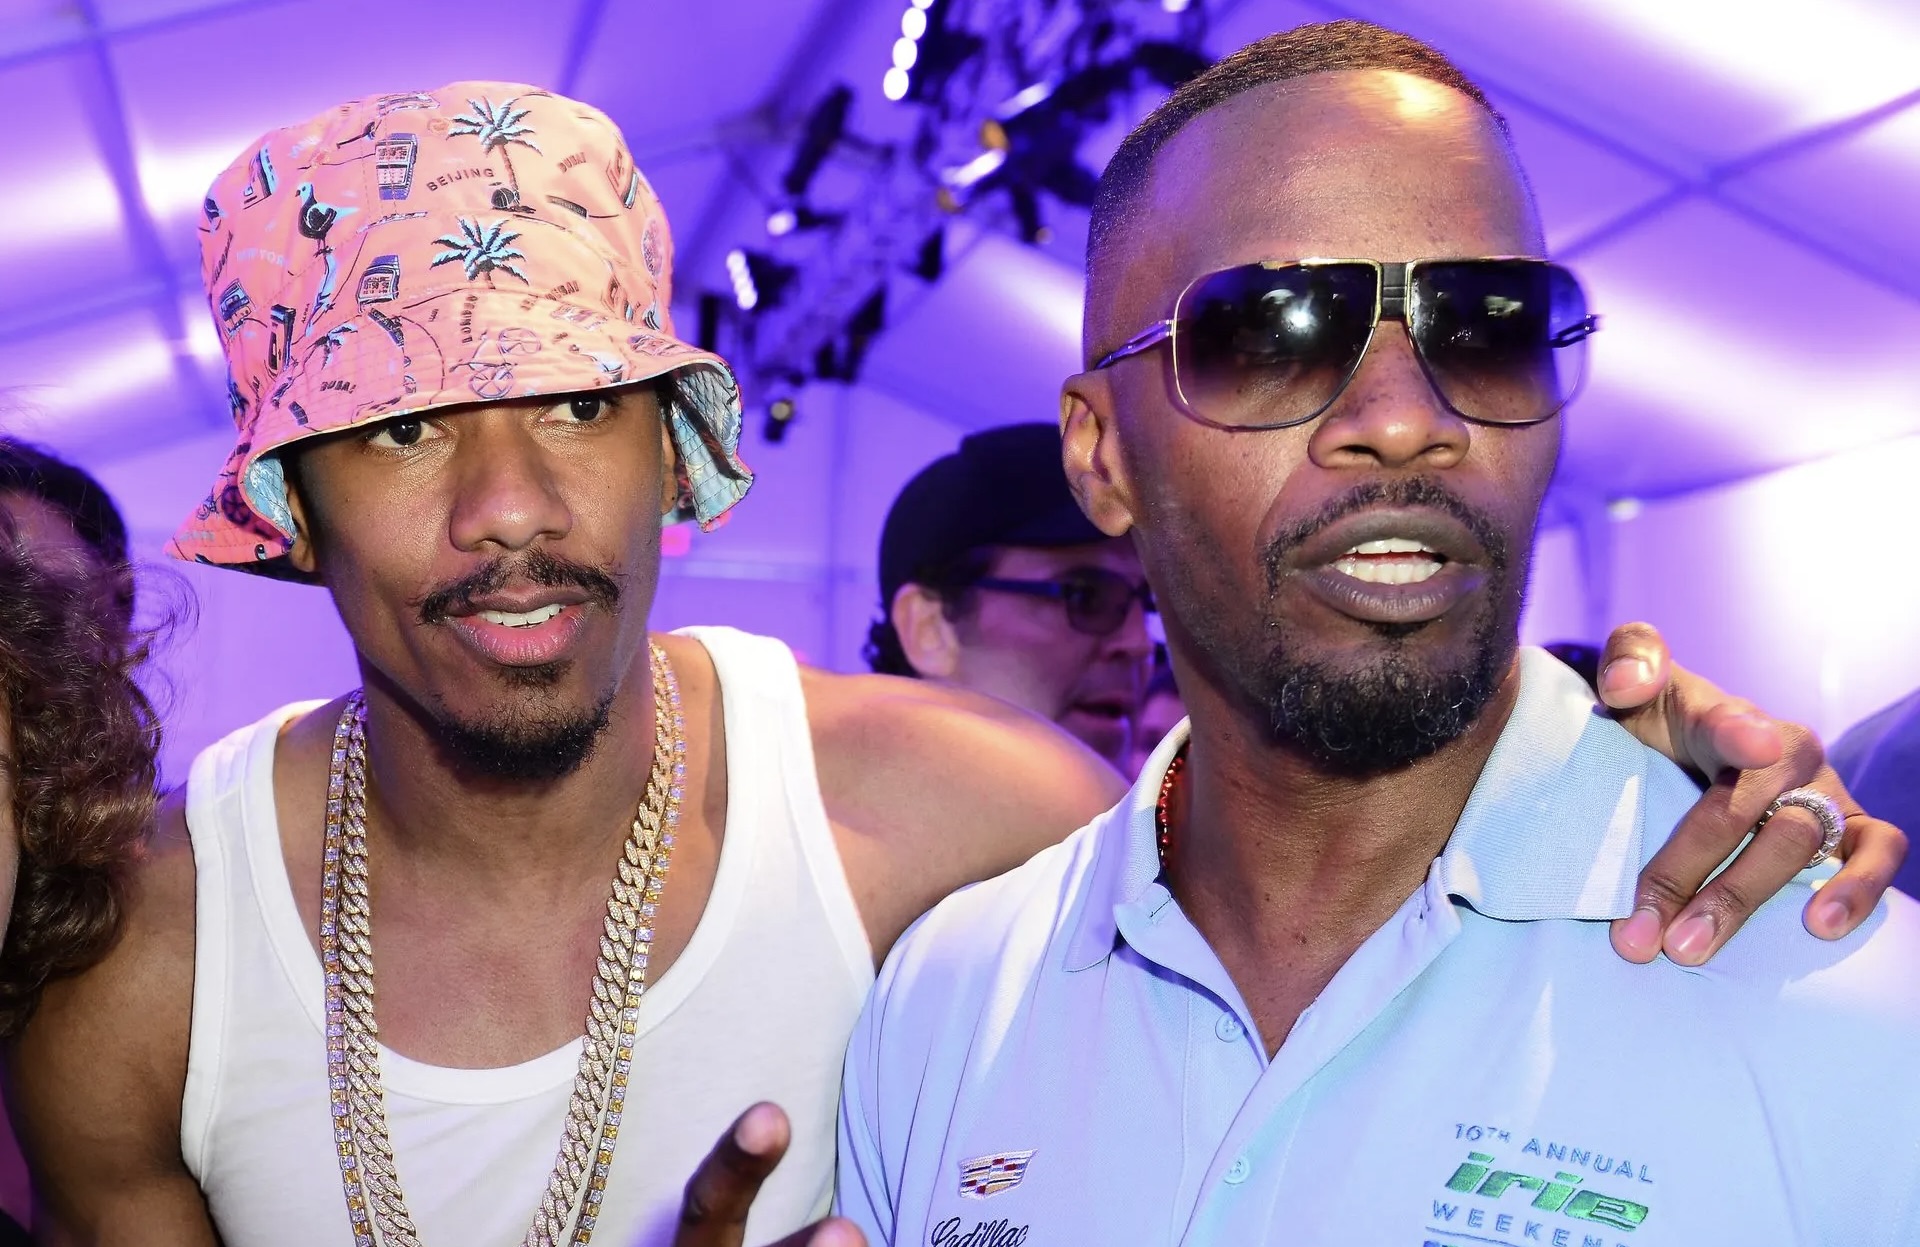 Nick Cannon Revealed That Jamie Foxx Plans To Give A Health Update On His Own Terms ‘When He’s Ready’